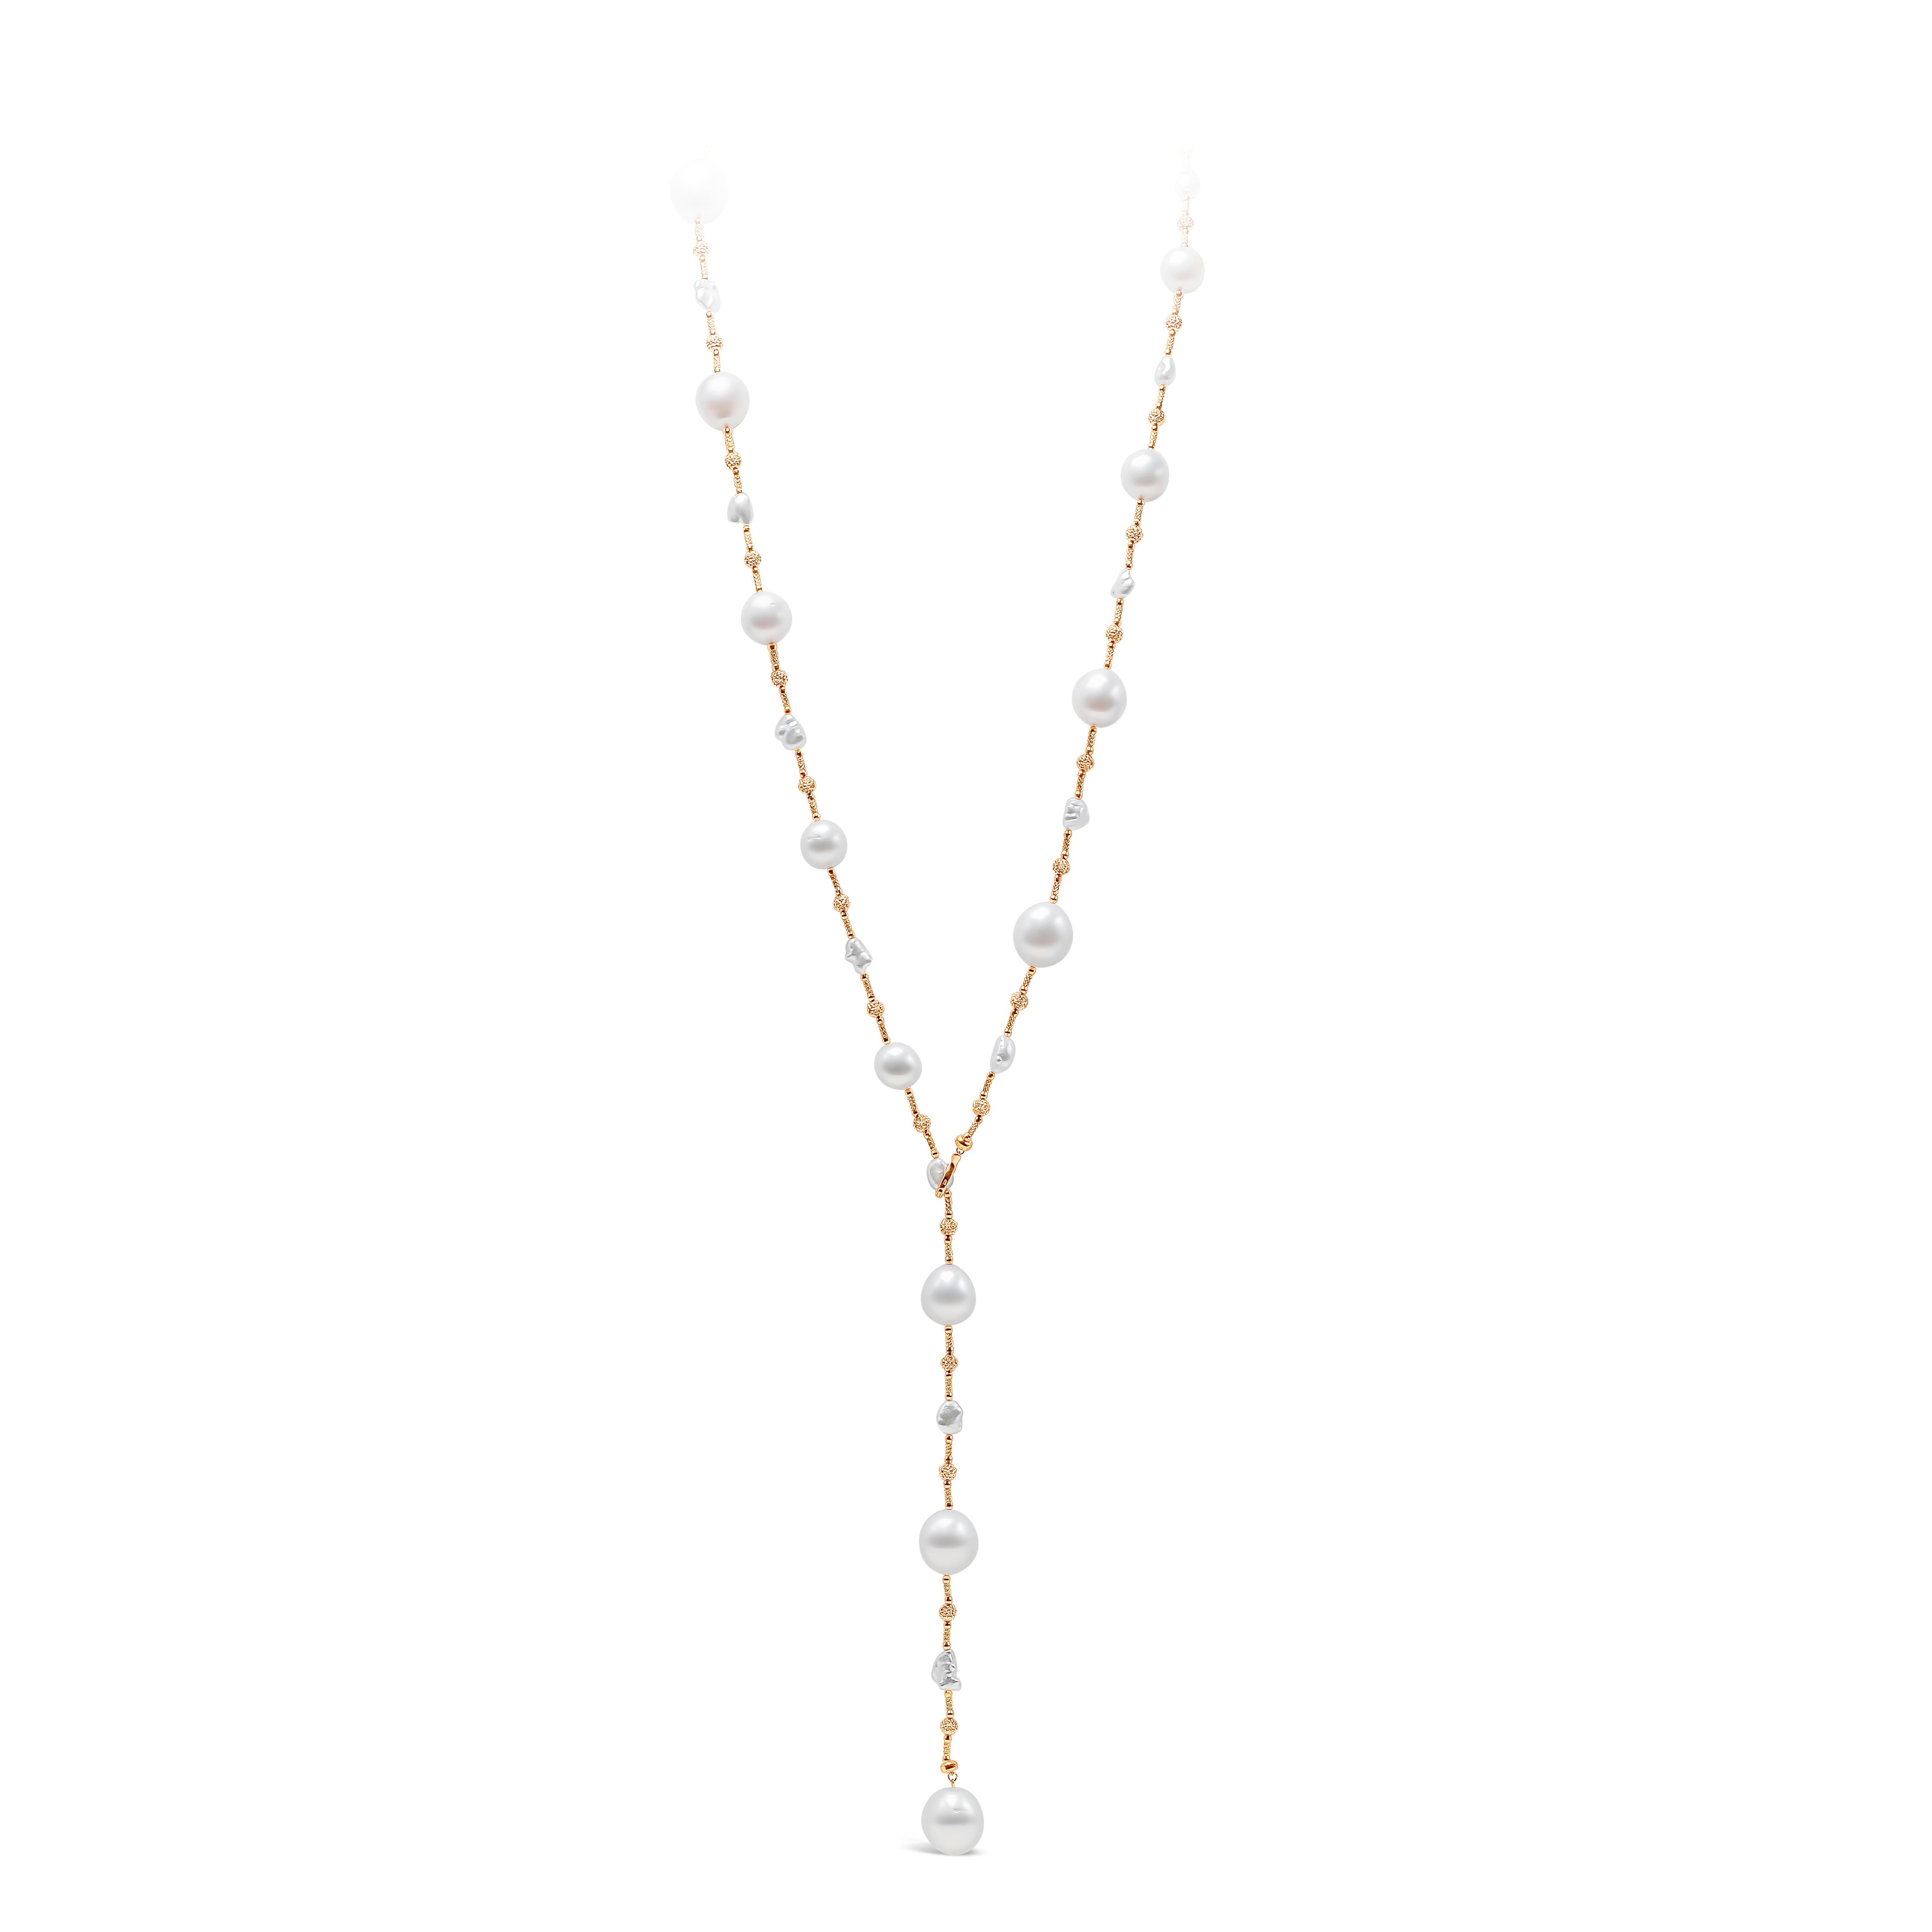 A very versatile necklace showcasing 11-14mm south sea pearls, spaced by 18k rose gold knots. 32 inches in length and can be used multiple ways as a necklace or bracelet. Made in 18k rose gold. A functional piece of jewelry that can be worn